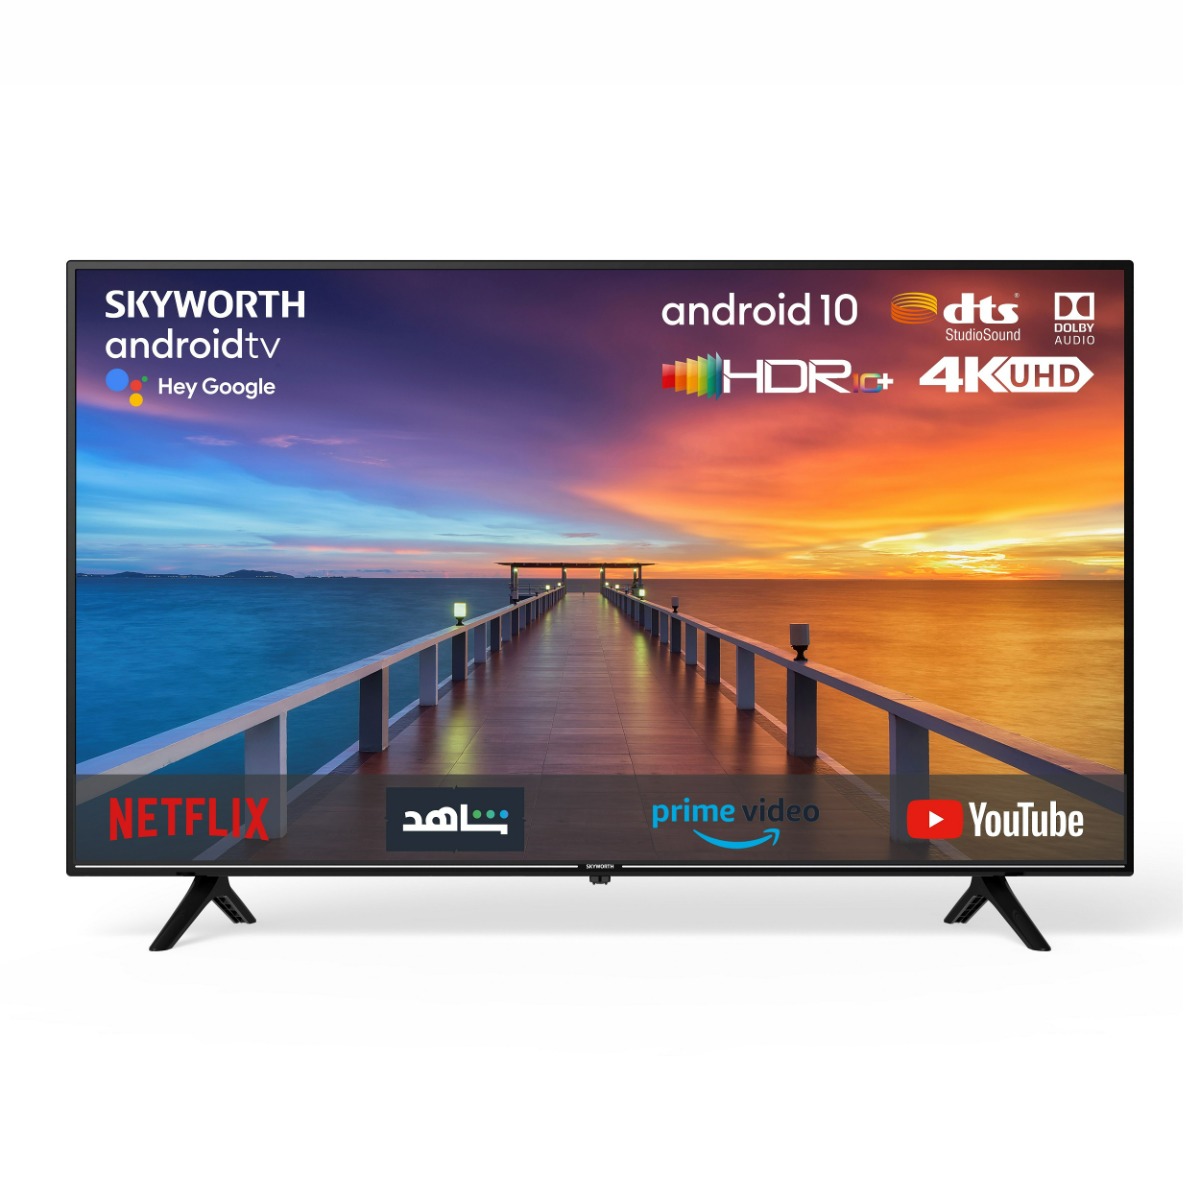 Skyworth 55inch UHD 4K, HDR 10, SMART, Android 10, LED TV- 55SUC9300